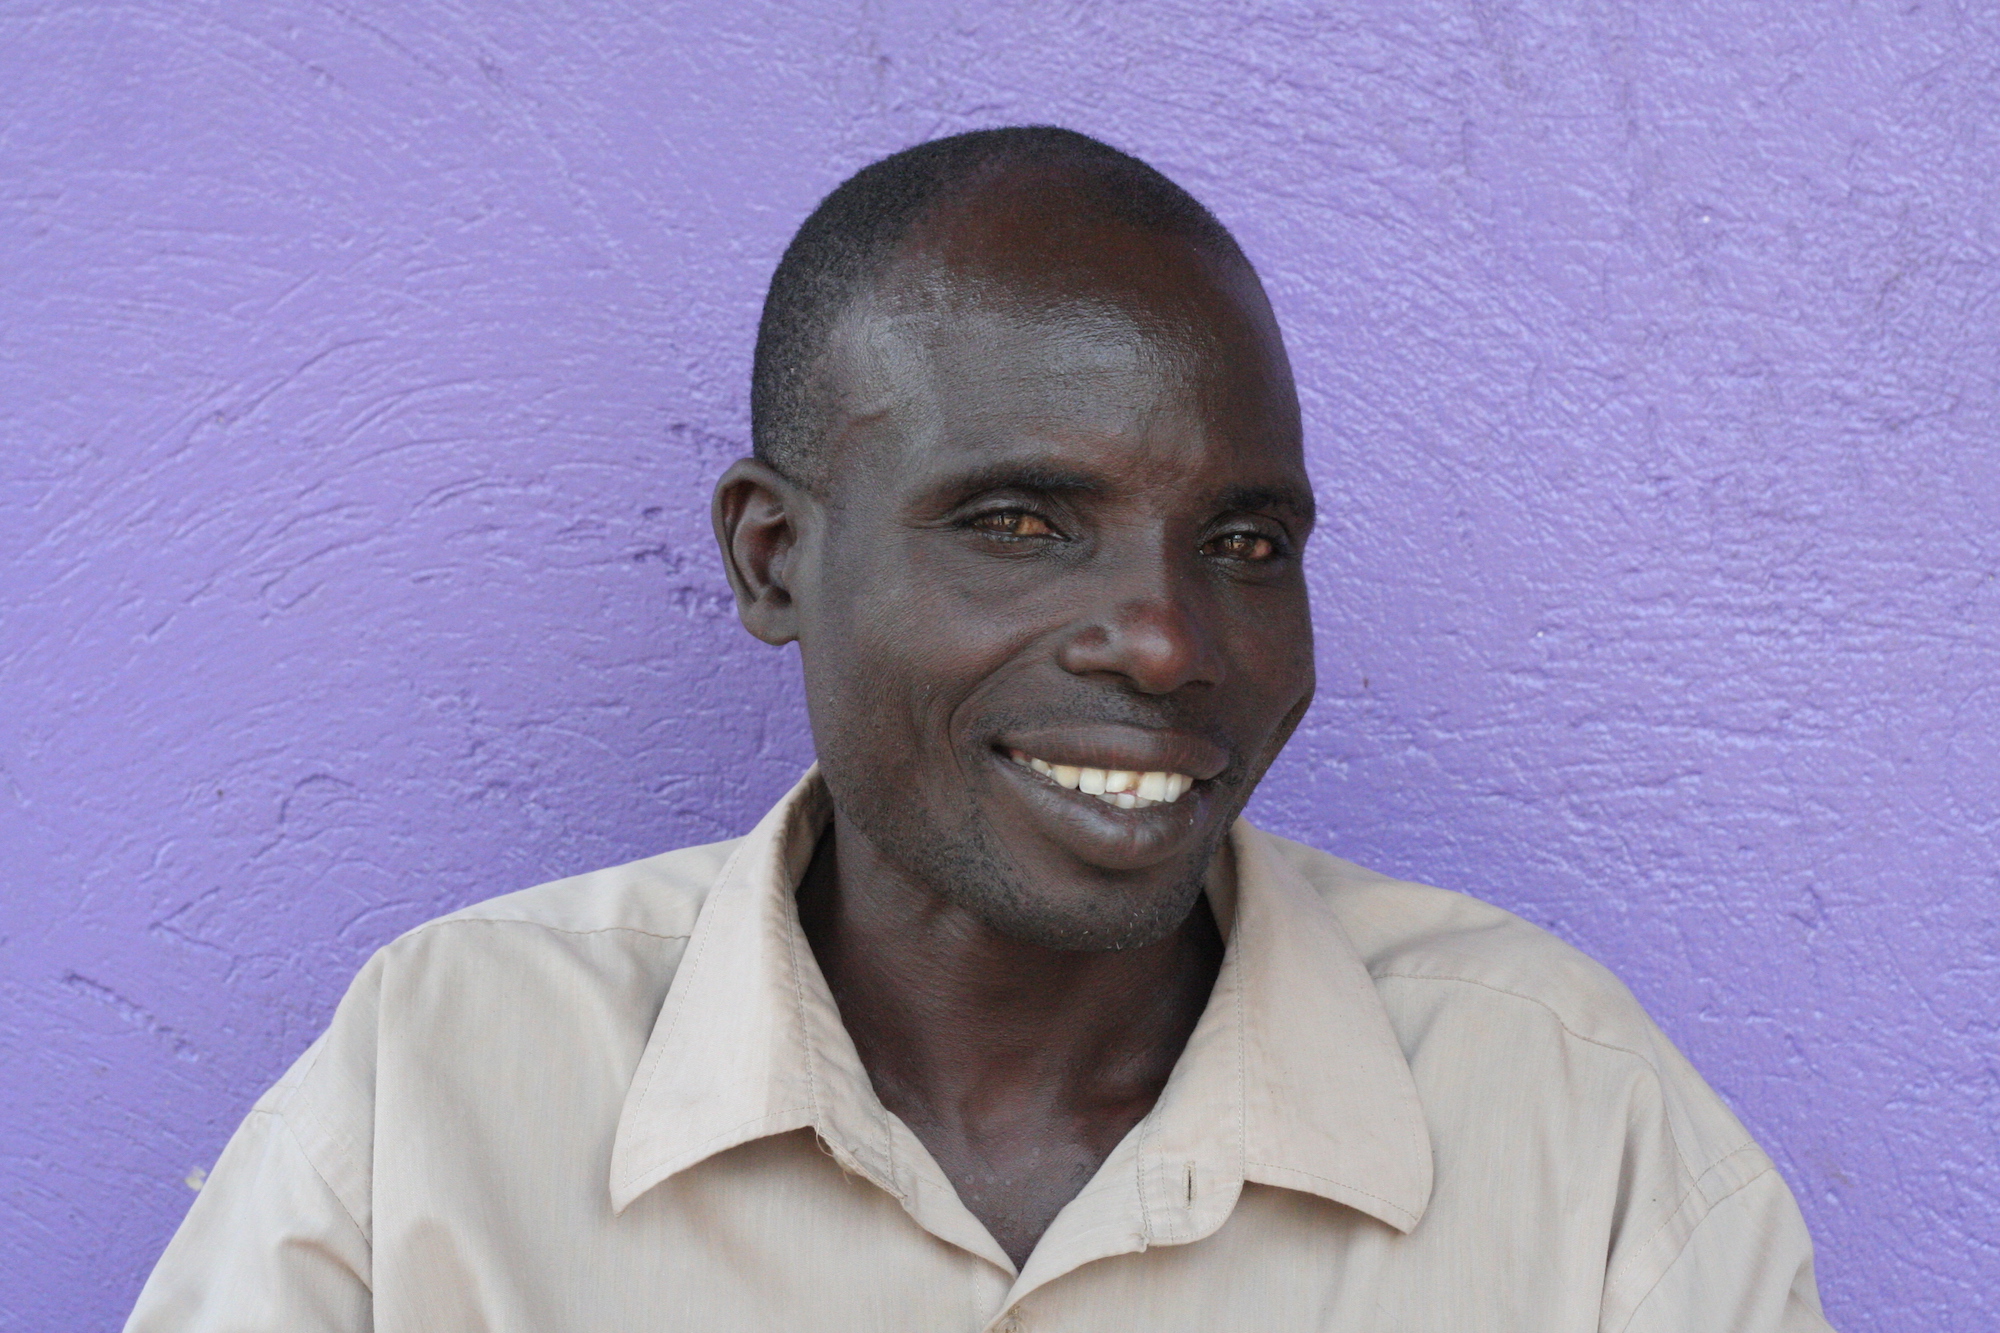 Man smiling in front of a purple wall